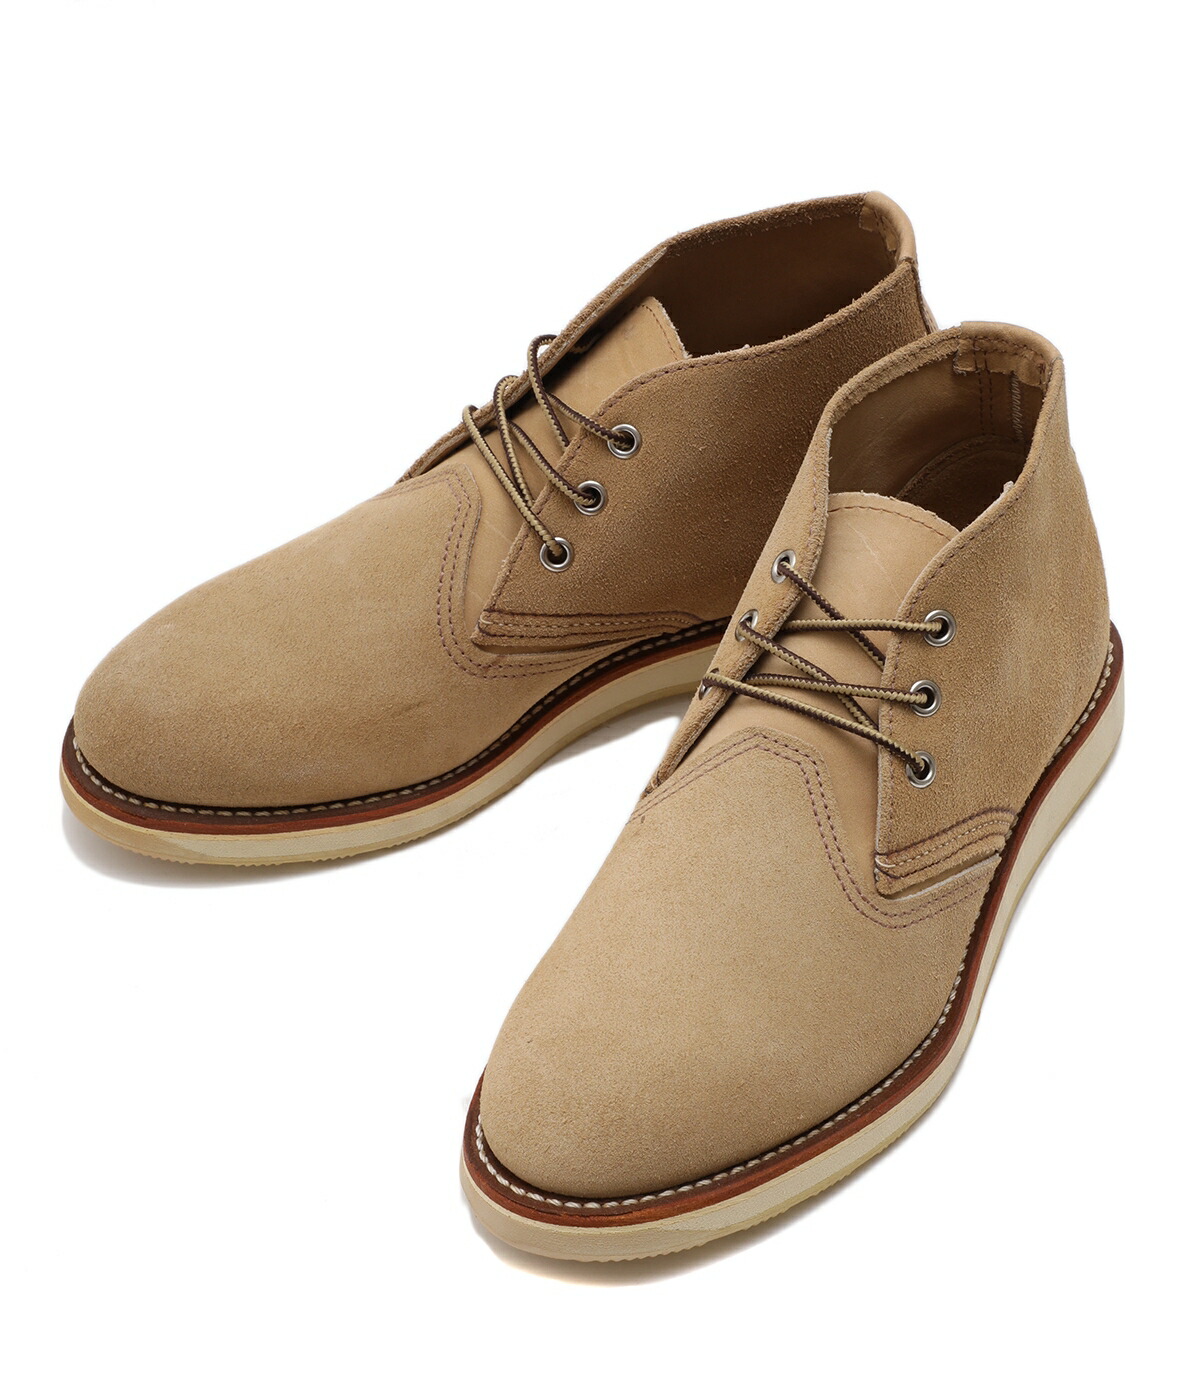 RED WING / レッドウィング ： WORK CHUKKA ： 3143 : 3143 : ARKnets